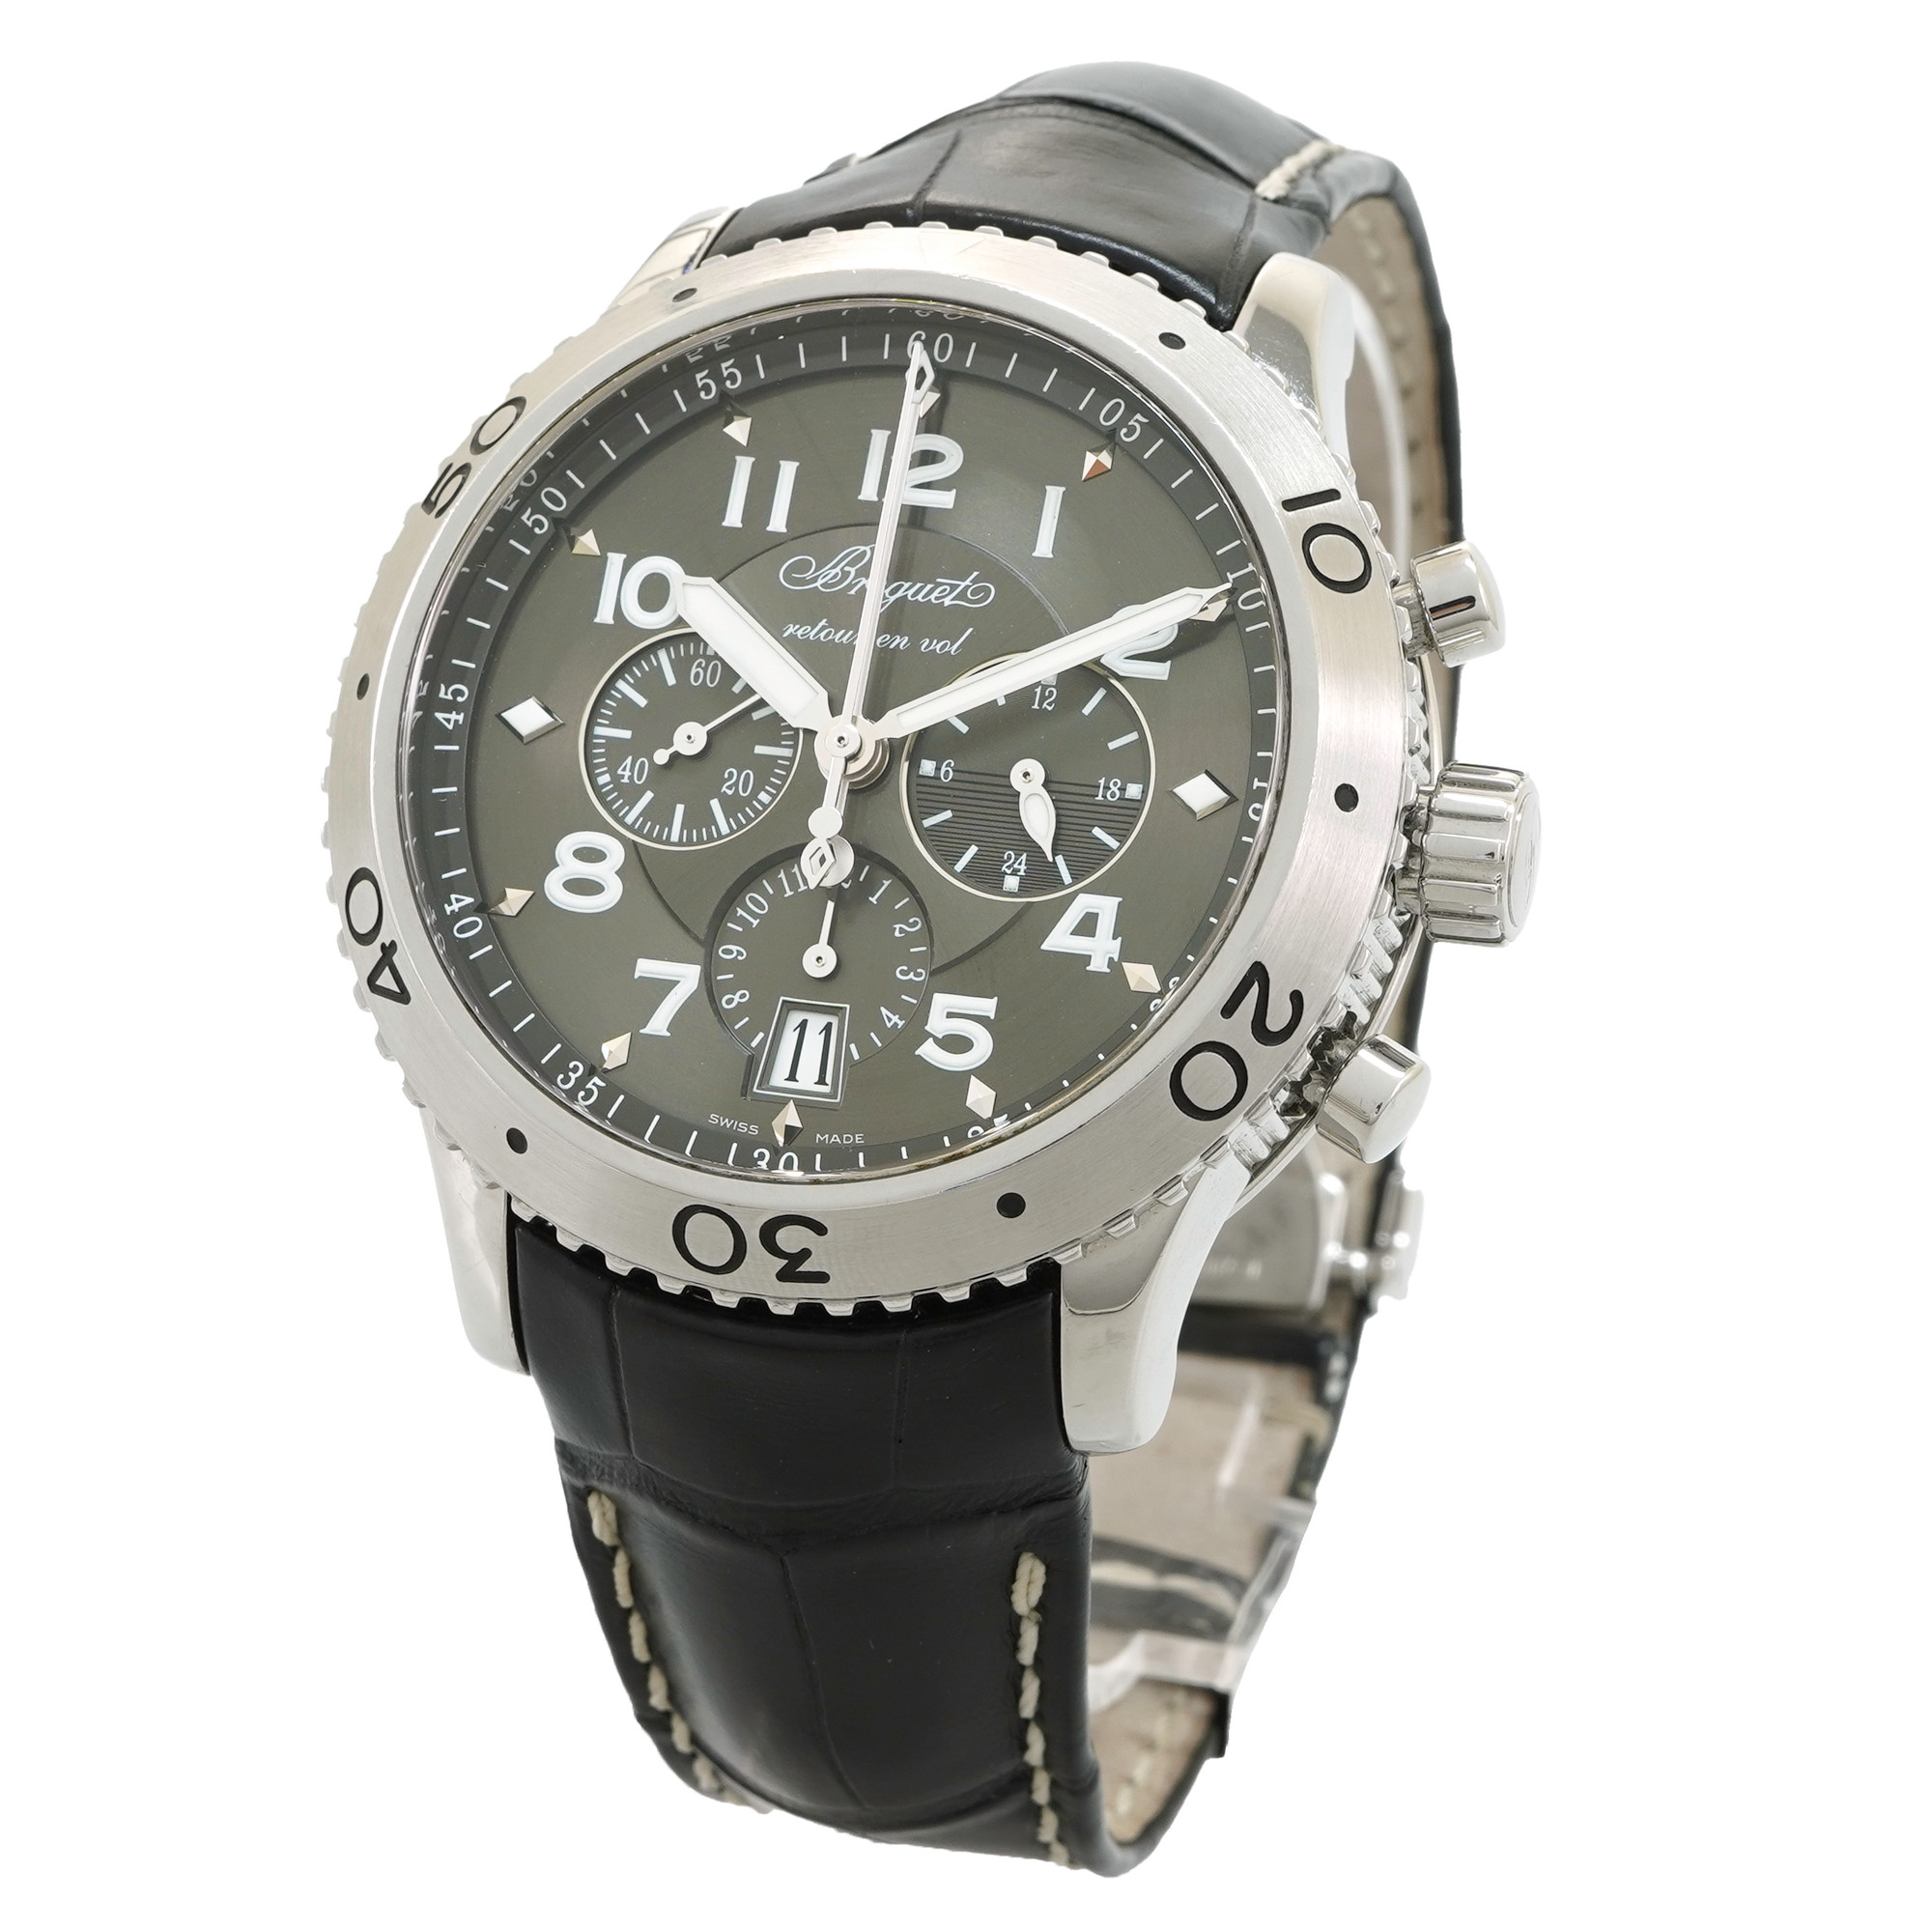 Breguet Type XXI Flyback 3810 Chronograph - Inventory 5573